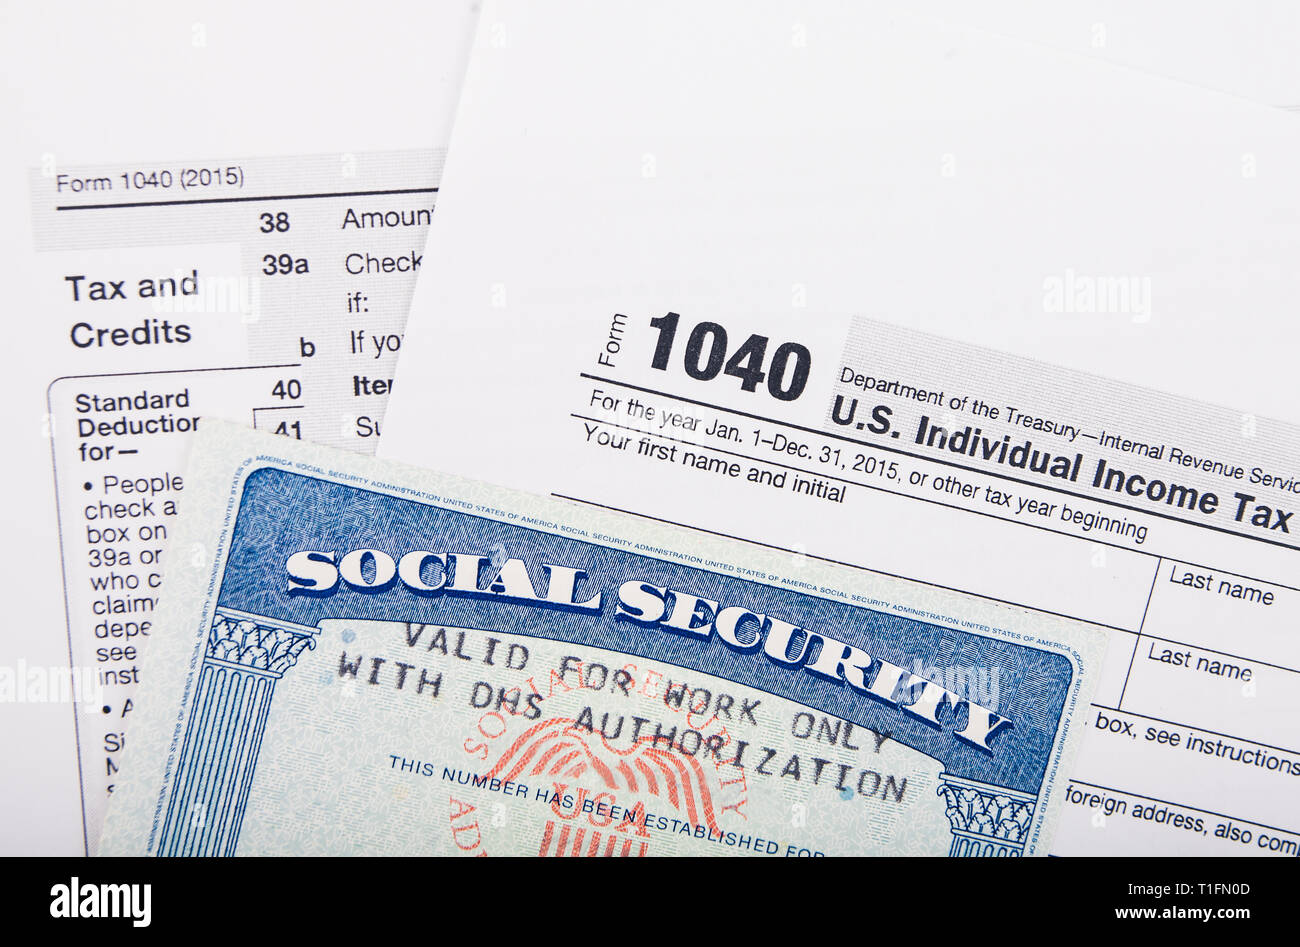 tax-return-form-and-social-security-number-card-stock-photo-alamy